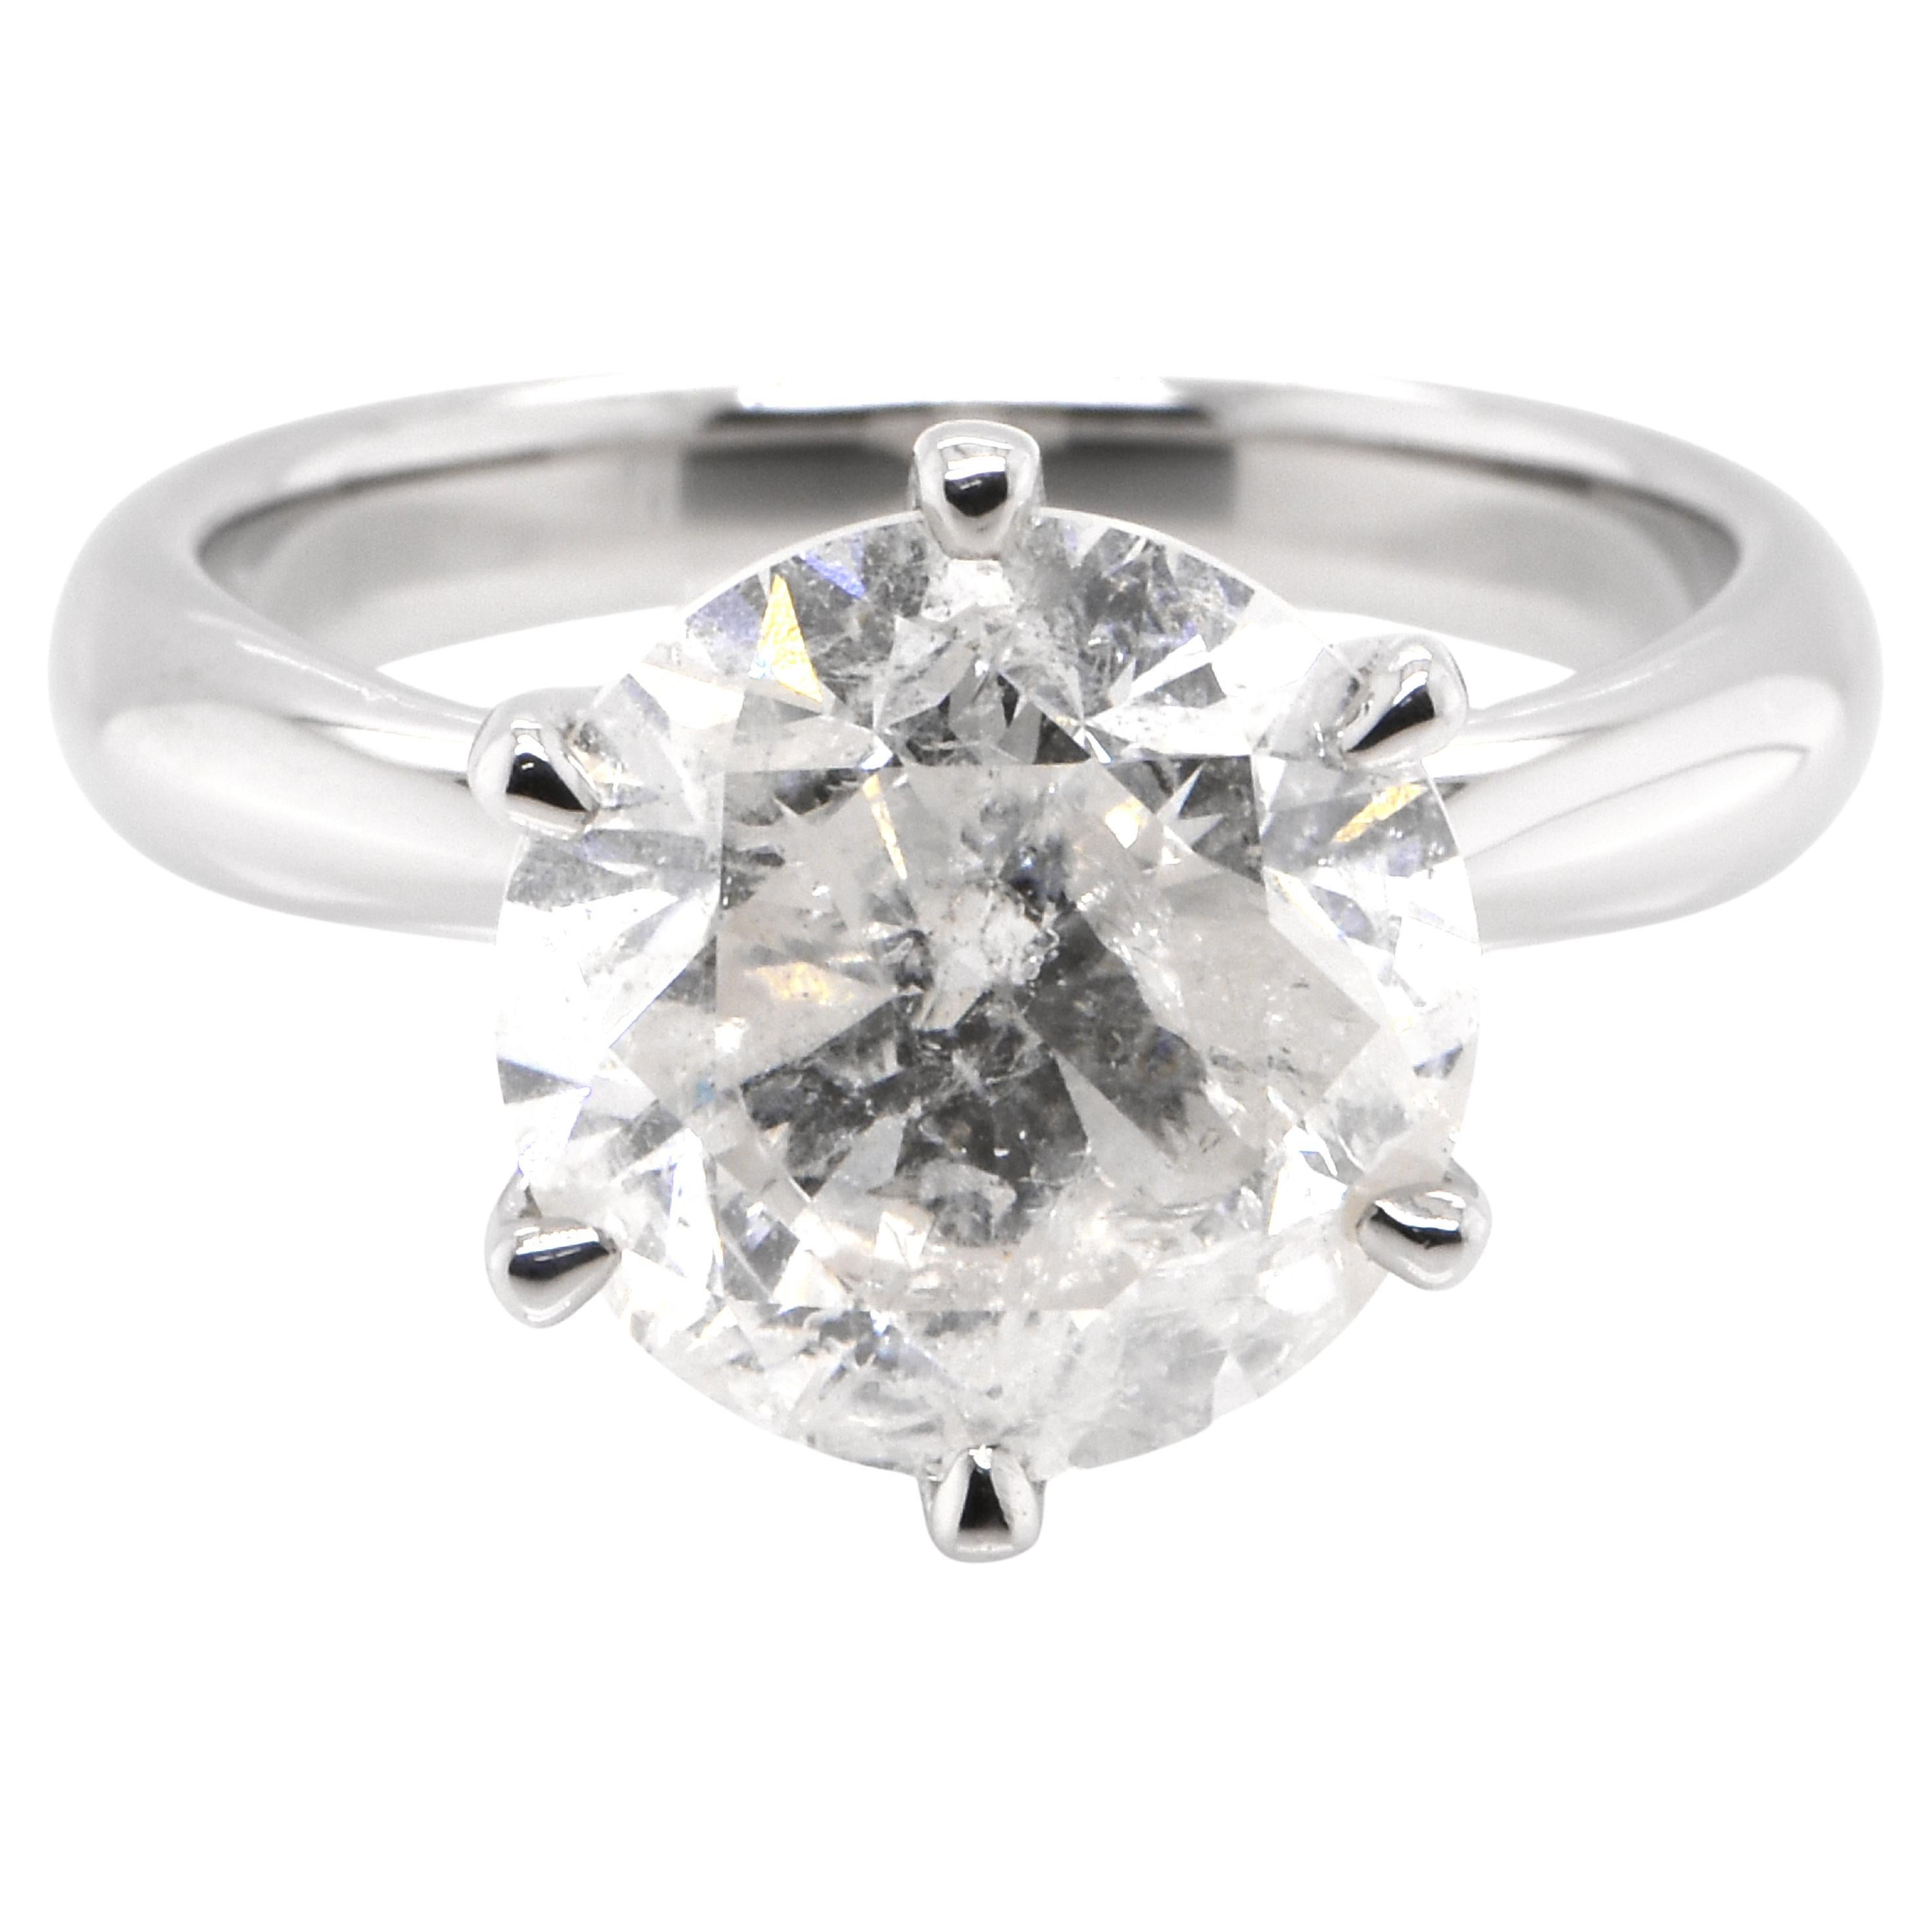 4.99 Carat Natural "Salt and Pepper" Diamond Solitaire Ring Made in Platinum